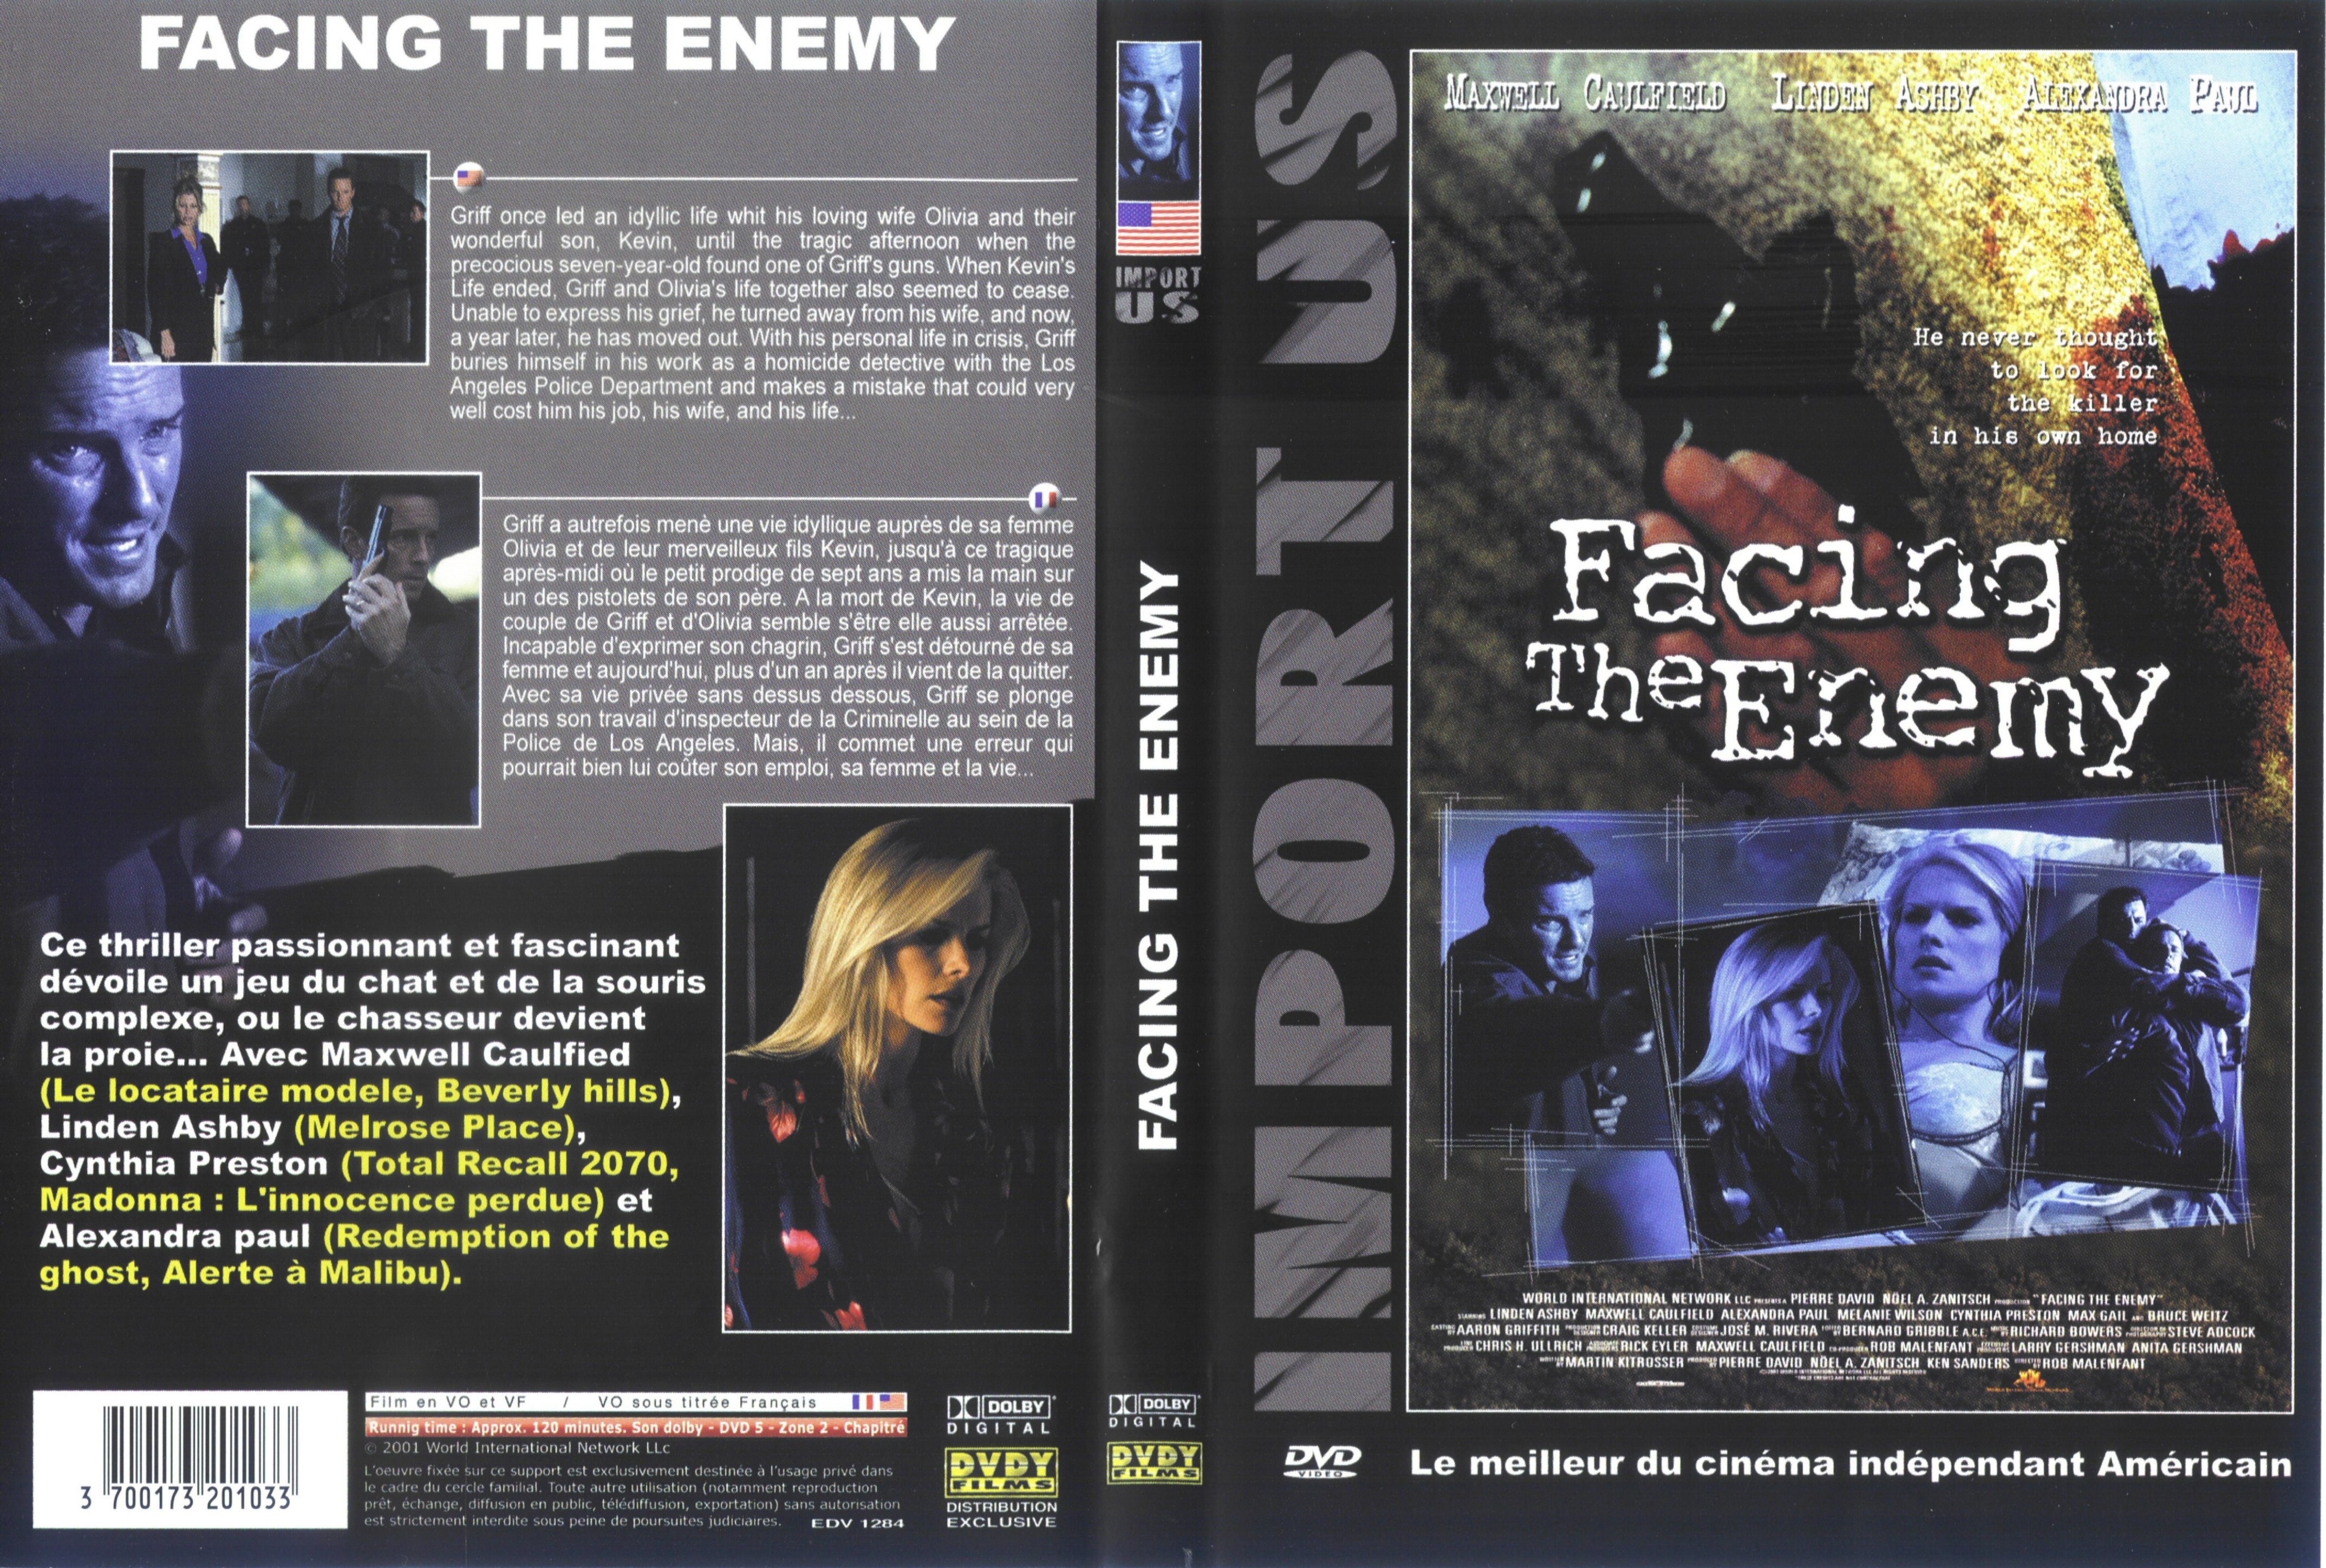 Jaquette DVD Facing the enemy